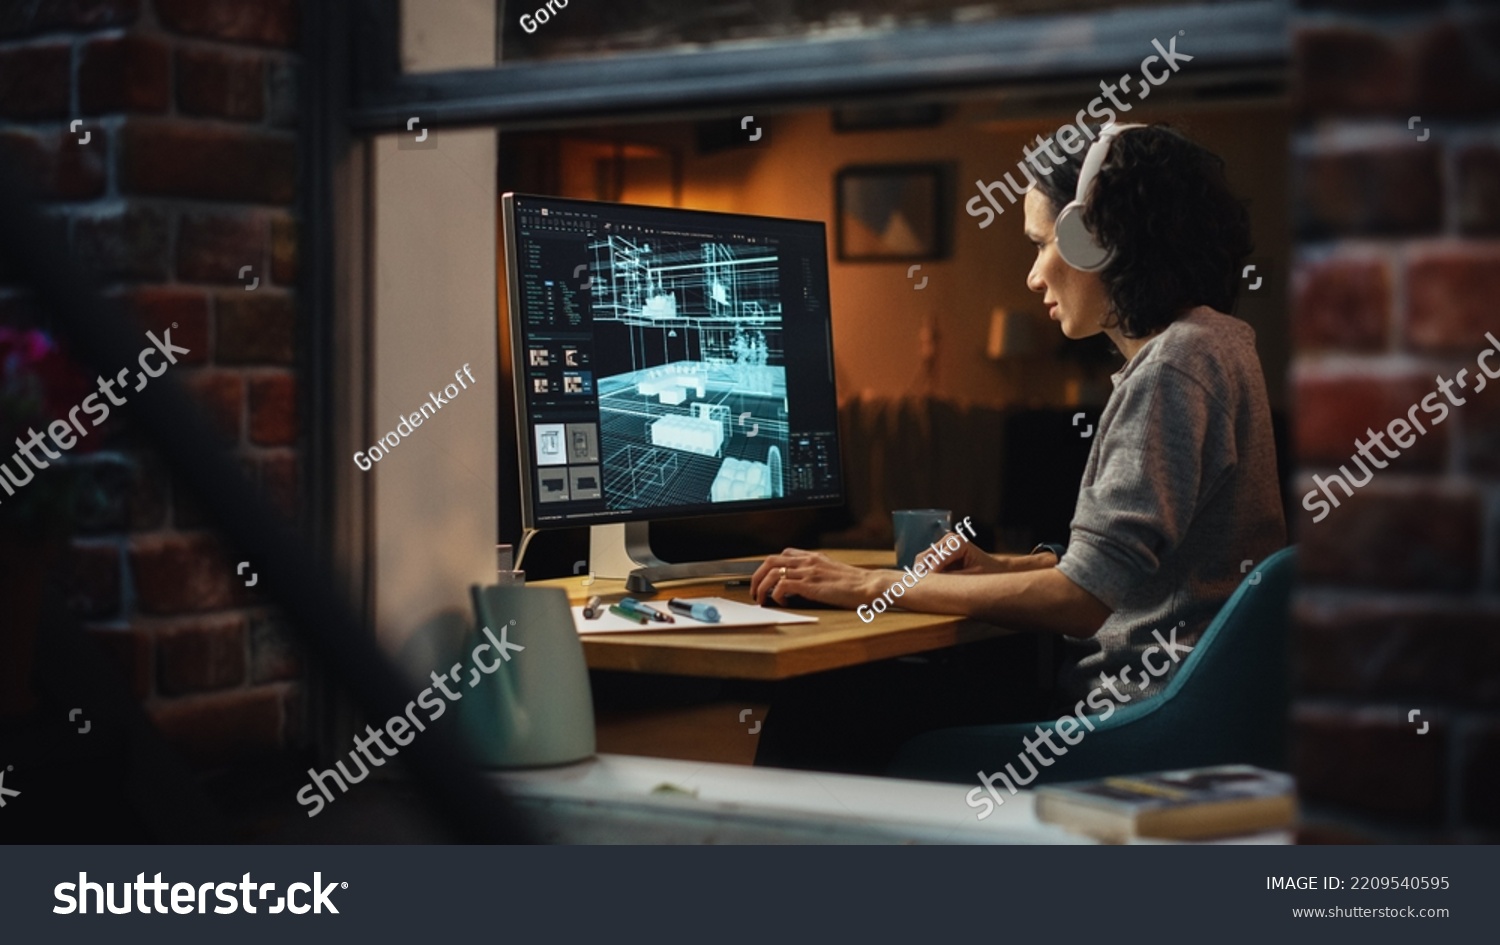 Creative Female 3D Architect Artist Using Desktop Computer with Display Showing CAD Real Estate Project. Brazilian Woman Video Game Developer Creating Gaming Level. View Into the Apartment Window. #2209540595